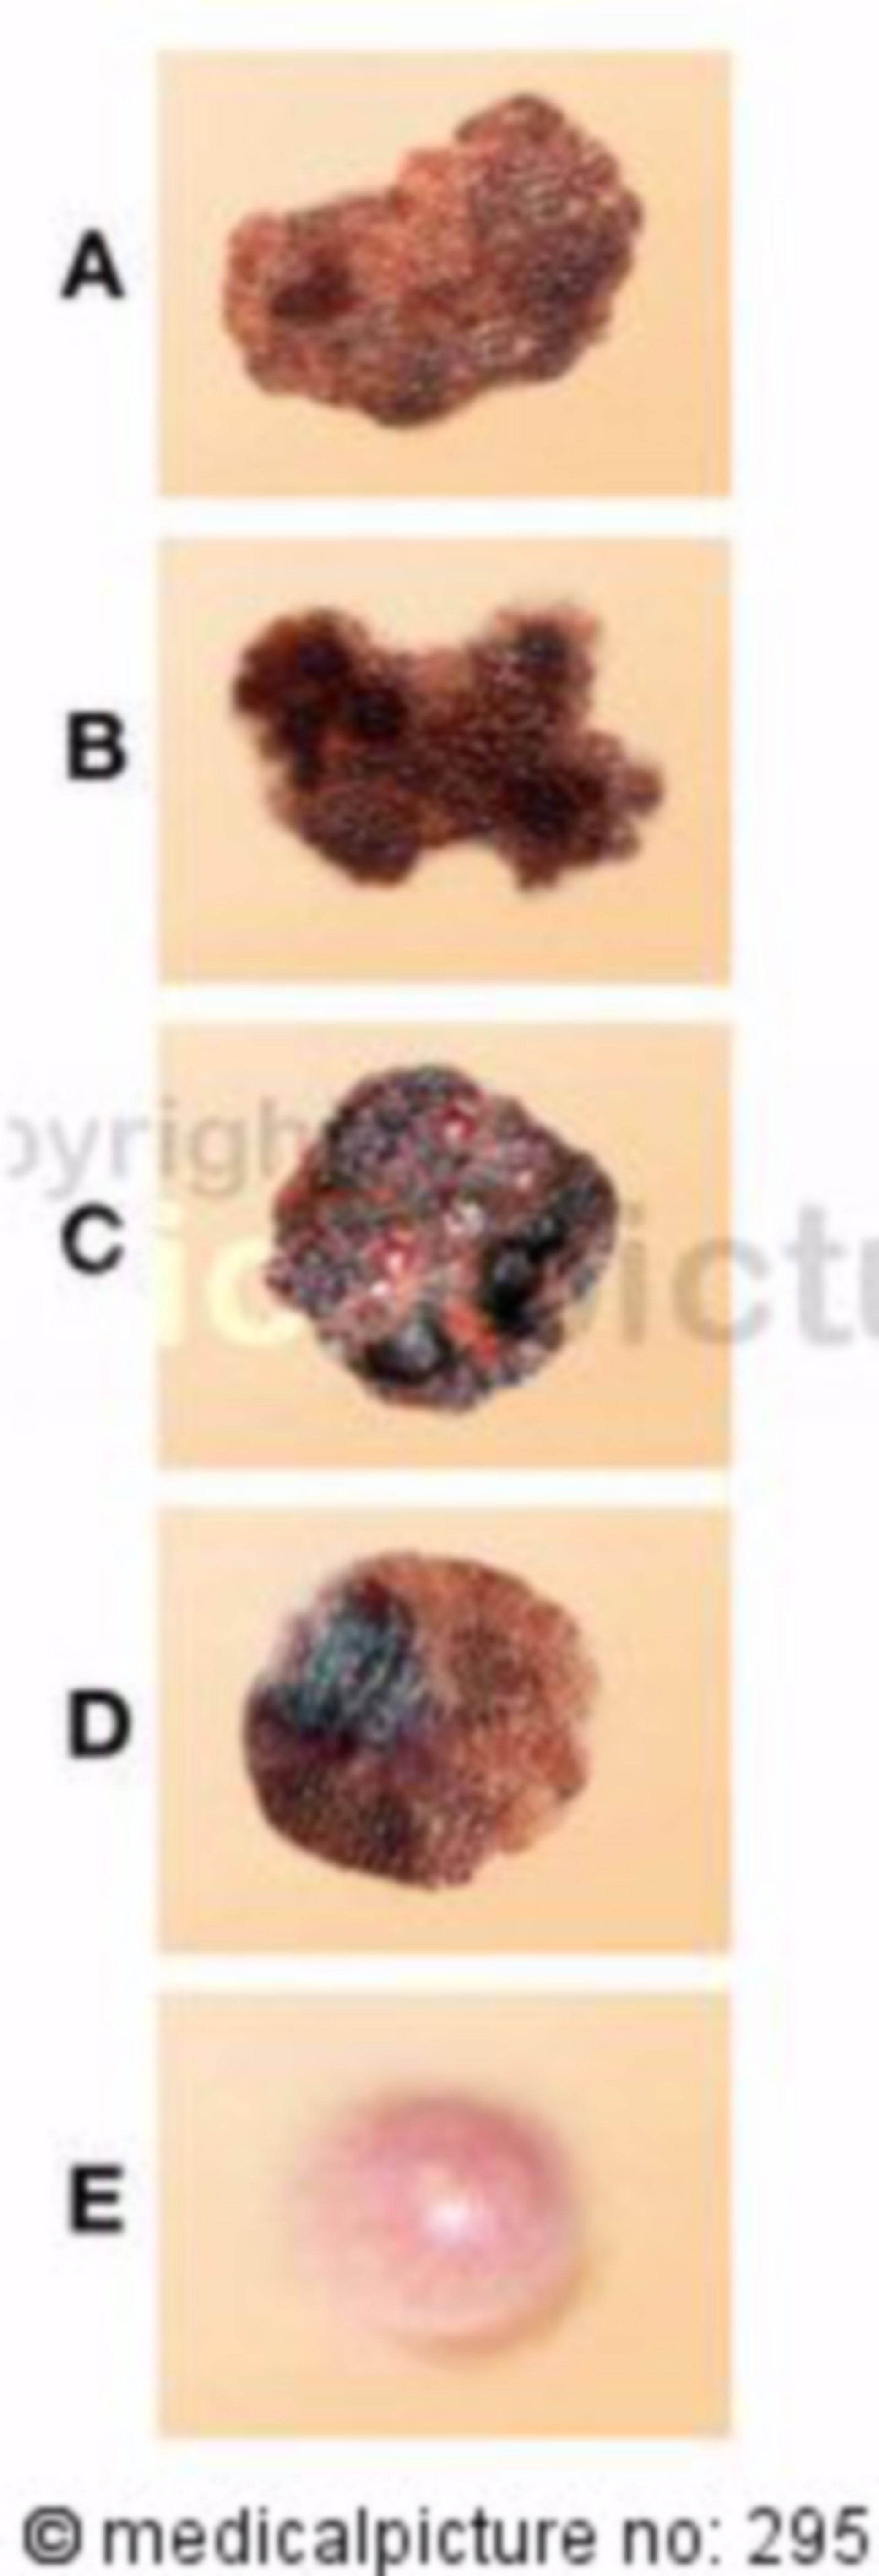 ABCDE-rule for differentiating skin tumors